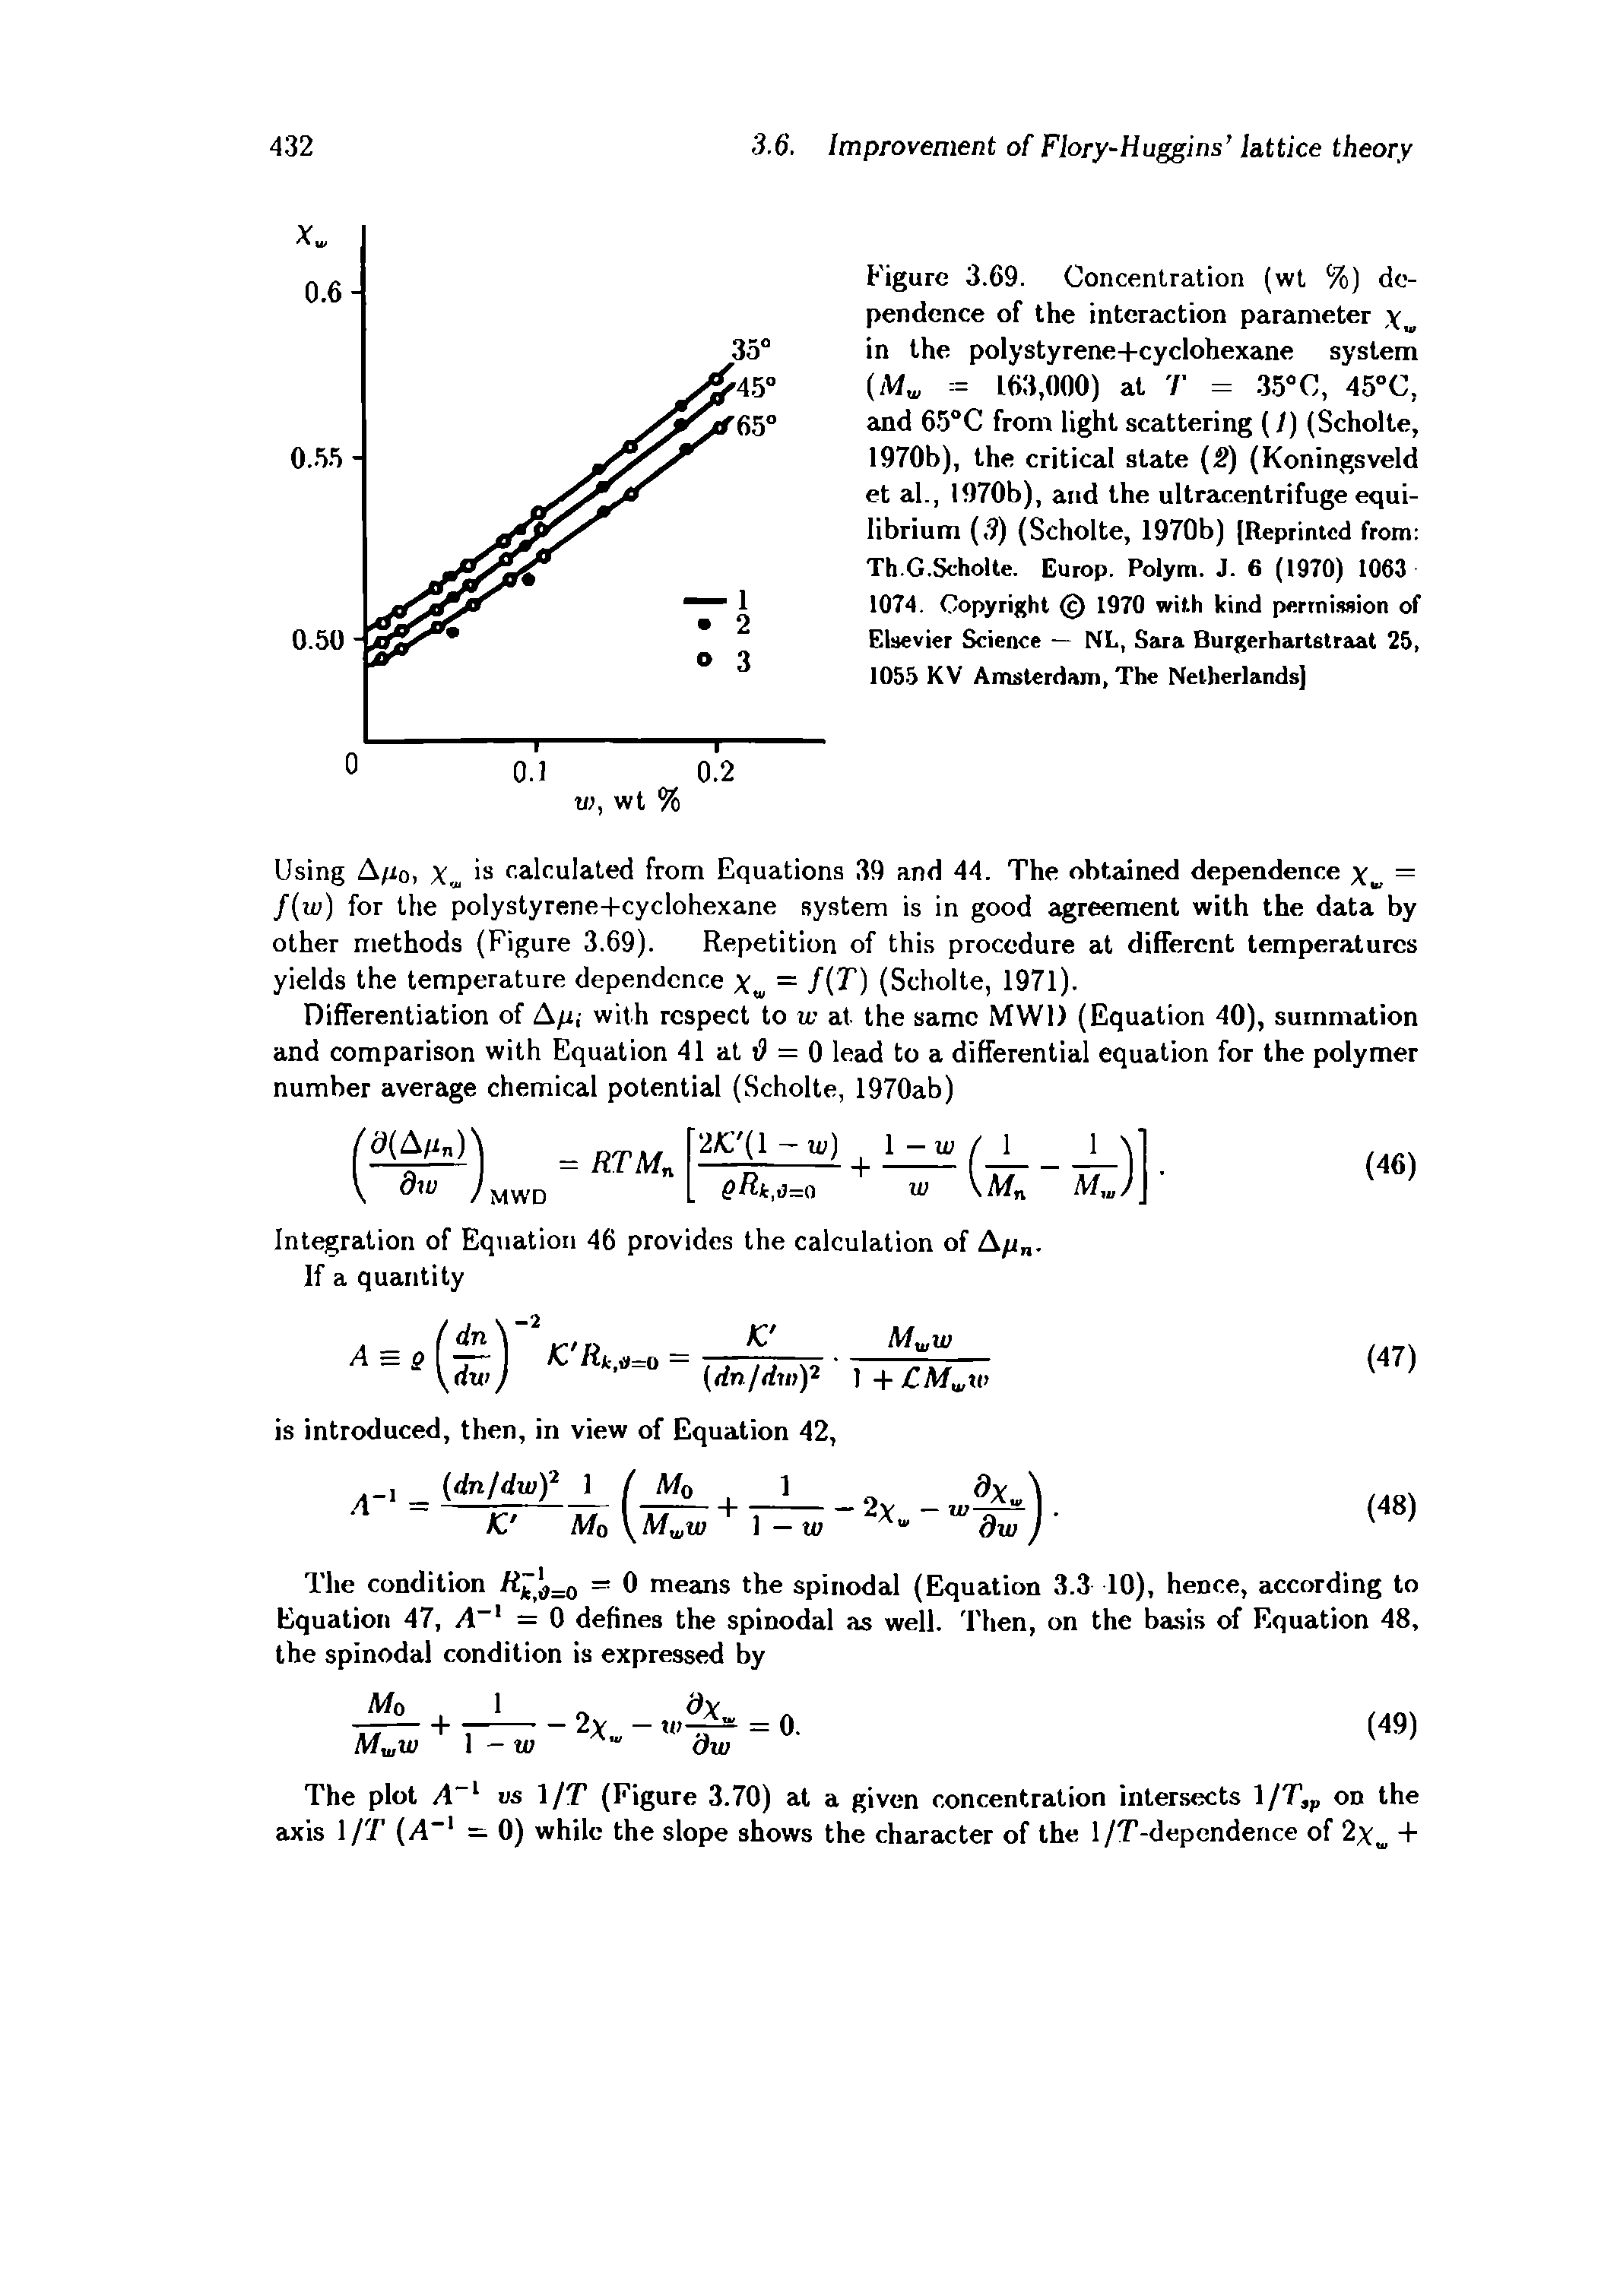 Figure 3.69. Concentration (wt %) dependence of the interaction parameter in the polystyrene- -cyclohexane system (iW == 163,000) at T =. 35 0, 45°C, and 6-5 C from light scattering (/) (Scholte, 1970b), the critical state (S) (Koningsveld et al., 1970b), and the ultracentrifuge equilibrium (.9) (Scholte, 1970b) [Reprinted from Th.G.Scholte. Europ. Polym. J. 6 (1970) 1063 1074. Copyright 1970 with kind permission of Eliievier Science — NL, Sara Burgerhartstraat 25, 1055 KV Amsterdam, The Netherlands]...